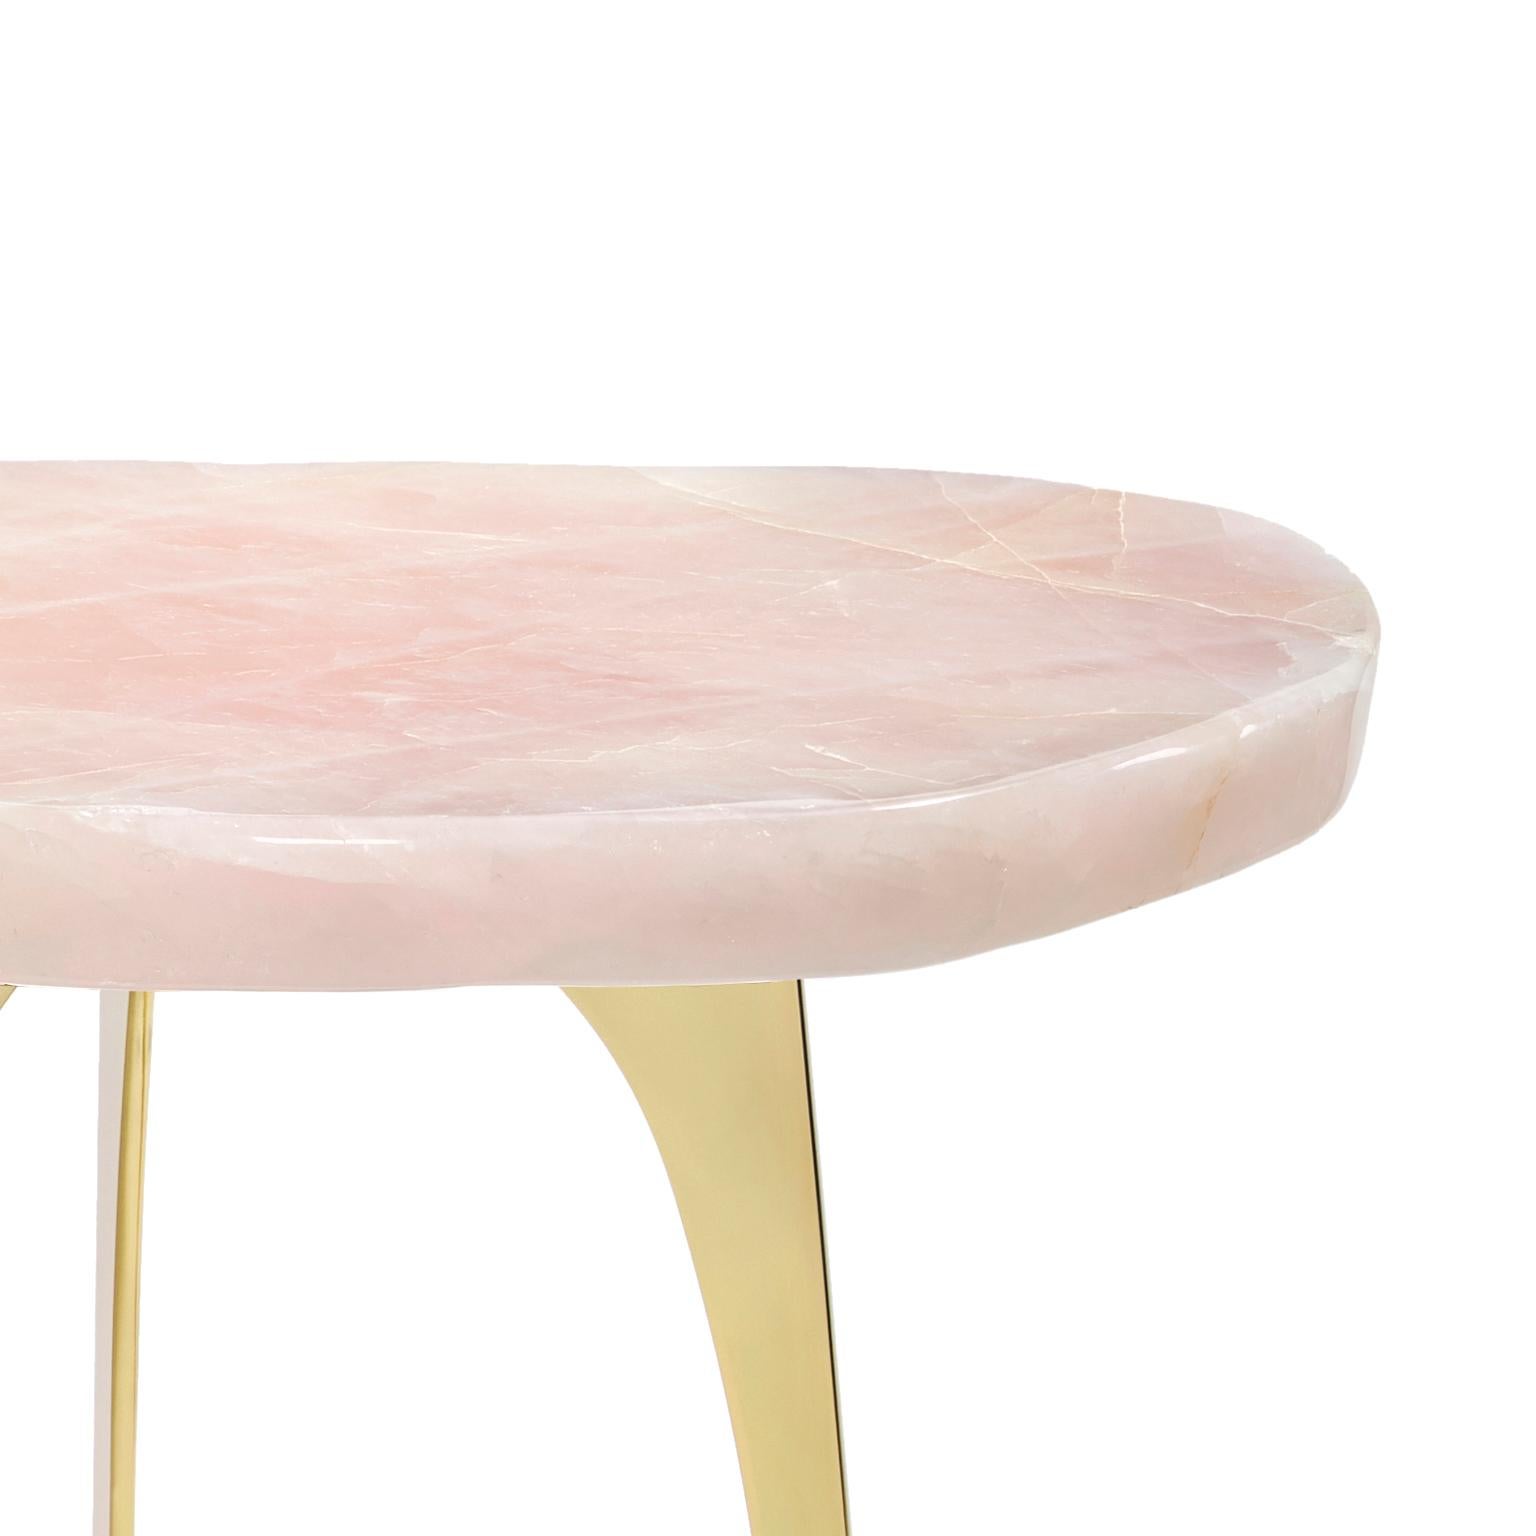 Contemporary Gigante Rose Quartz Table with Brass Base by Anna New York